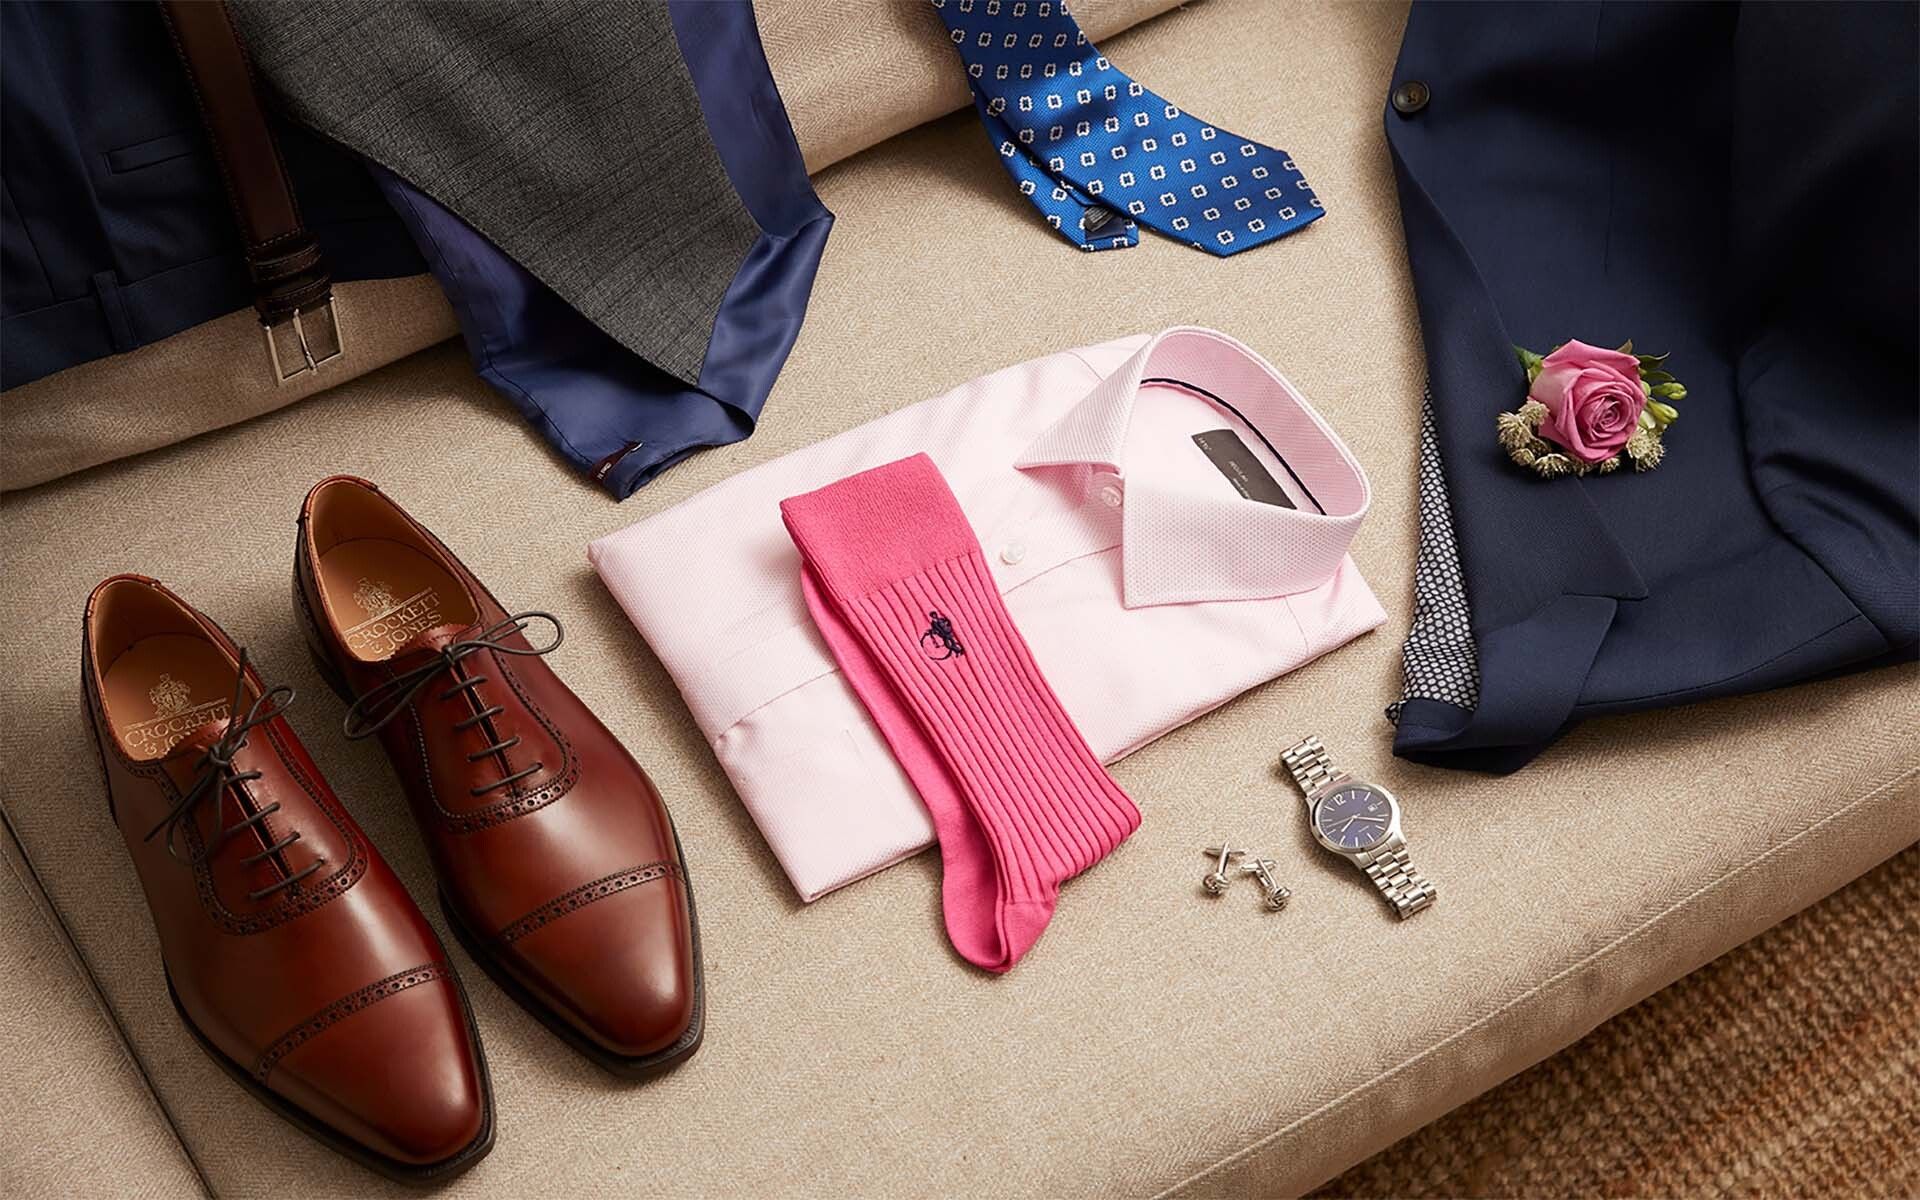 Men’s Style Tips: How to wear pink socks